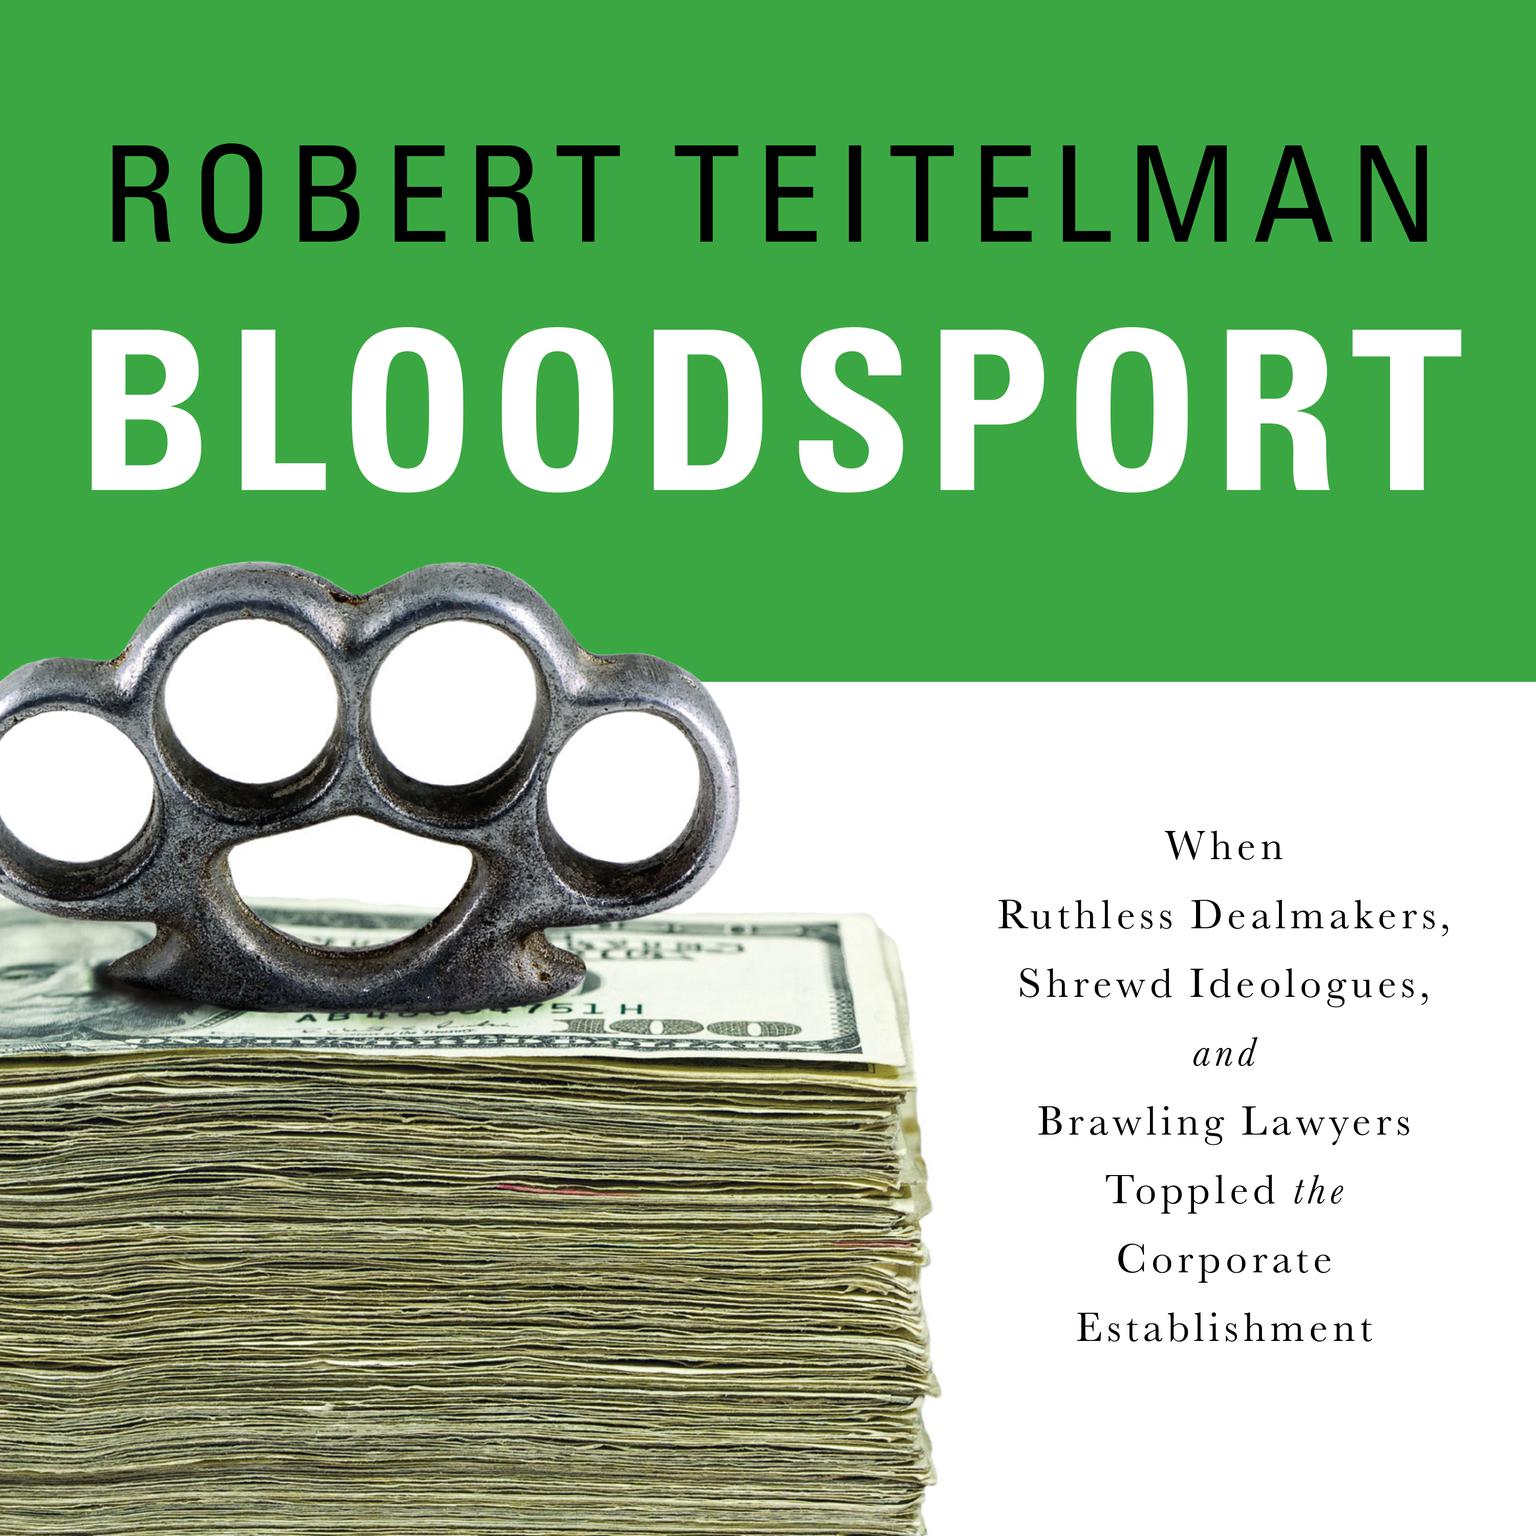 Bloodsport: When Ruthless Dealmakers, Shrewd Ideologues, and Brawling Lawyers Toppled the Corporate Establishment Audiobook, by Robert Teitelman